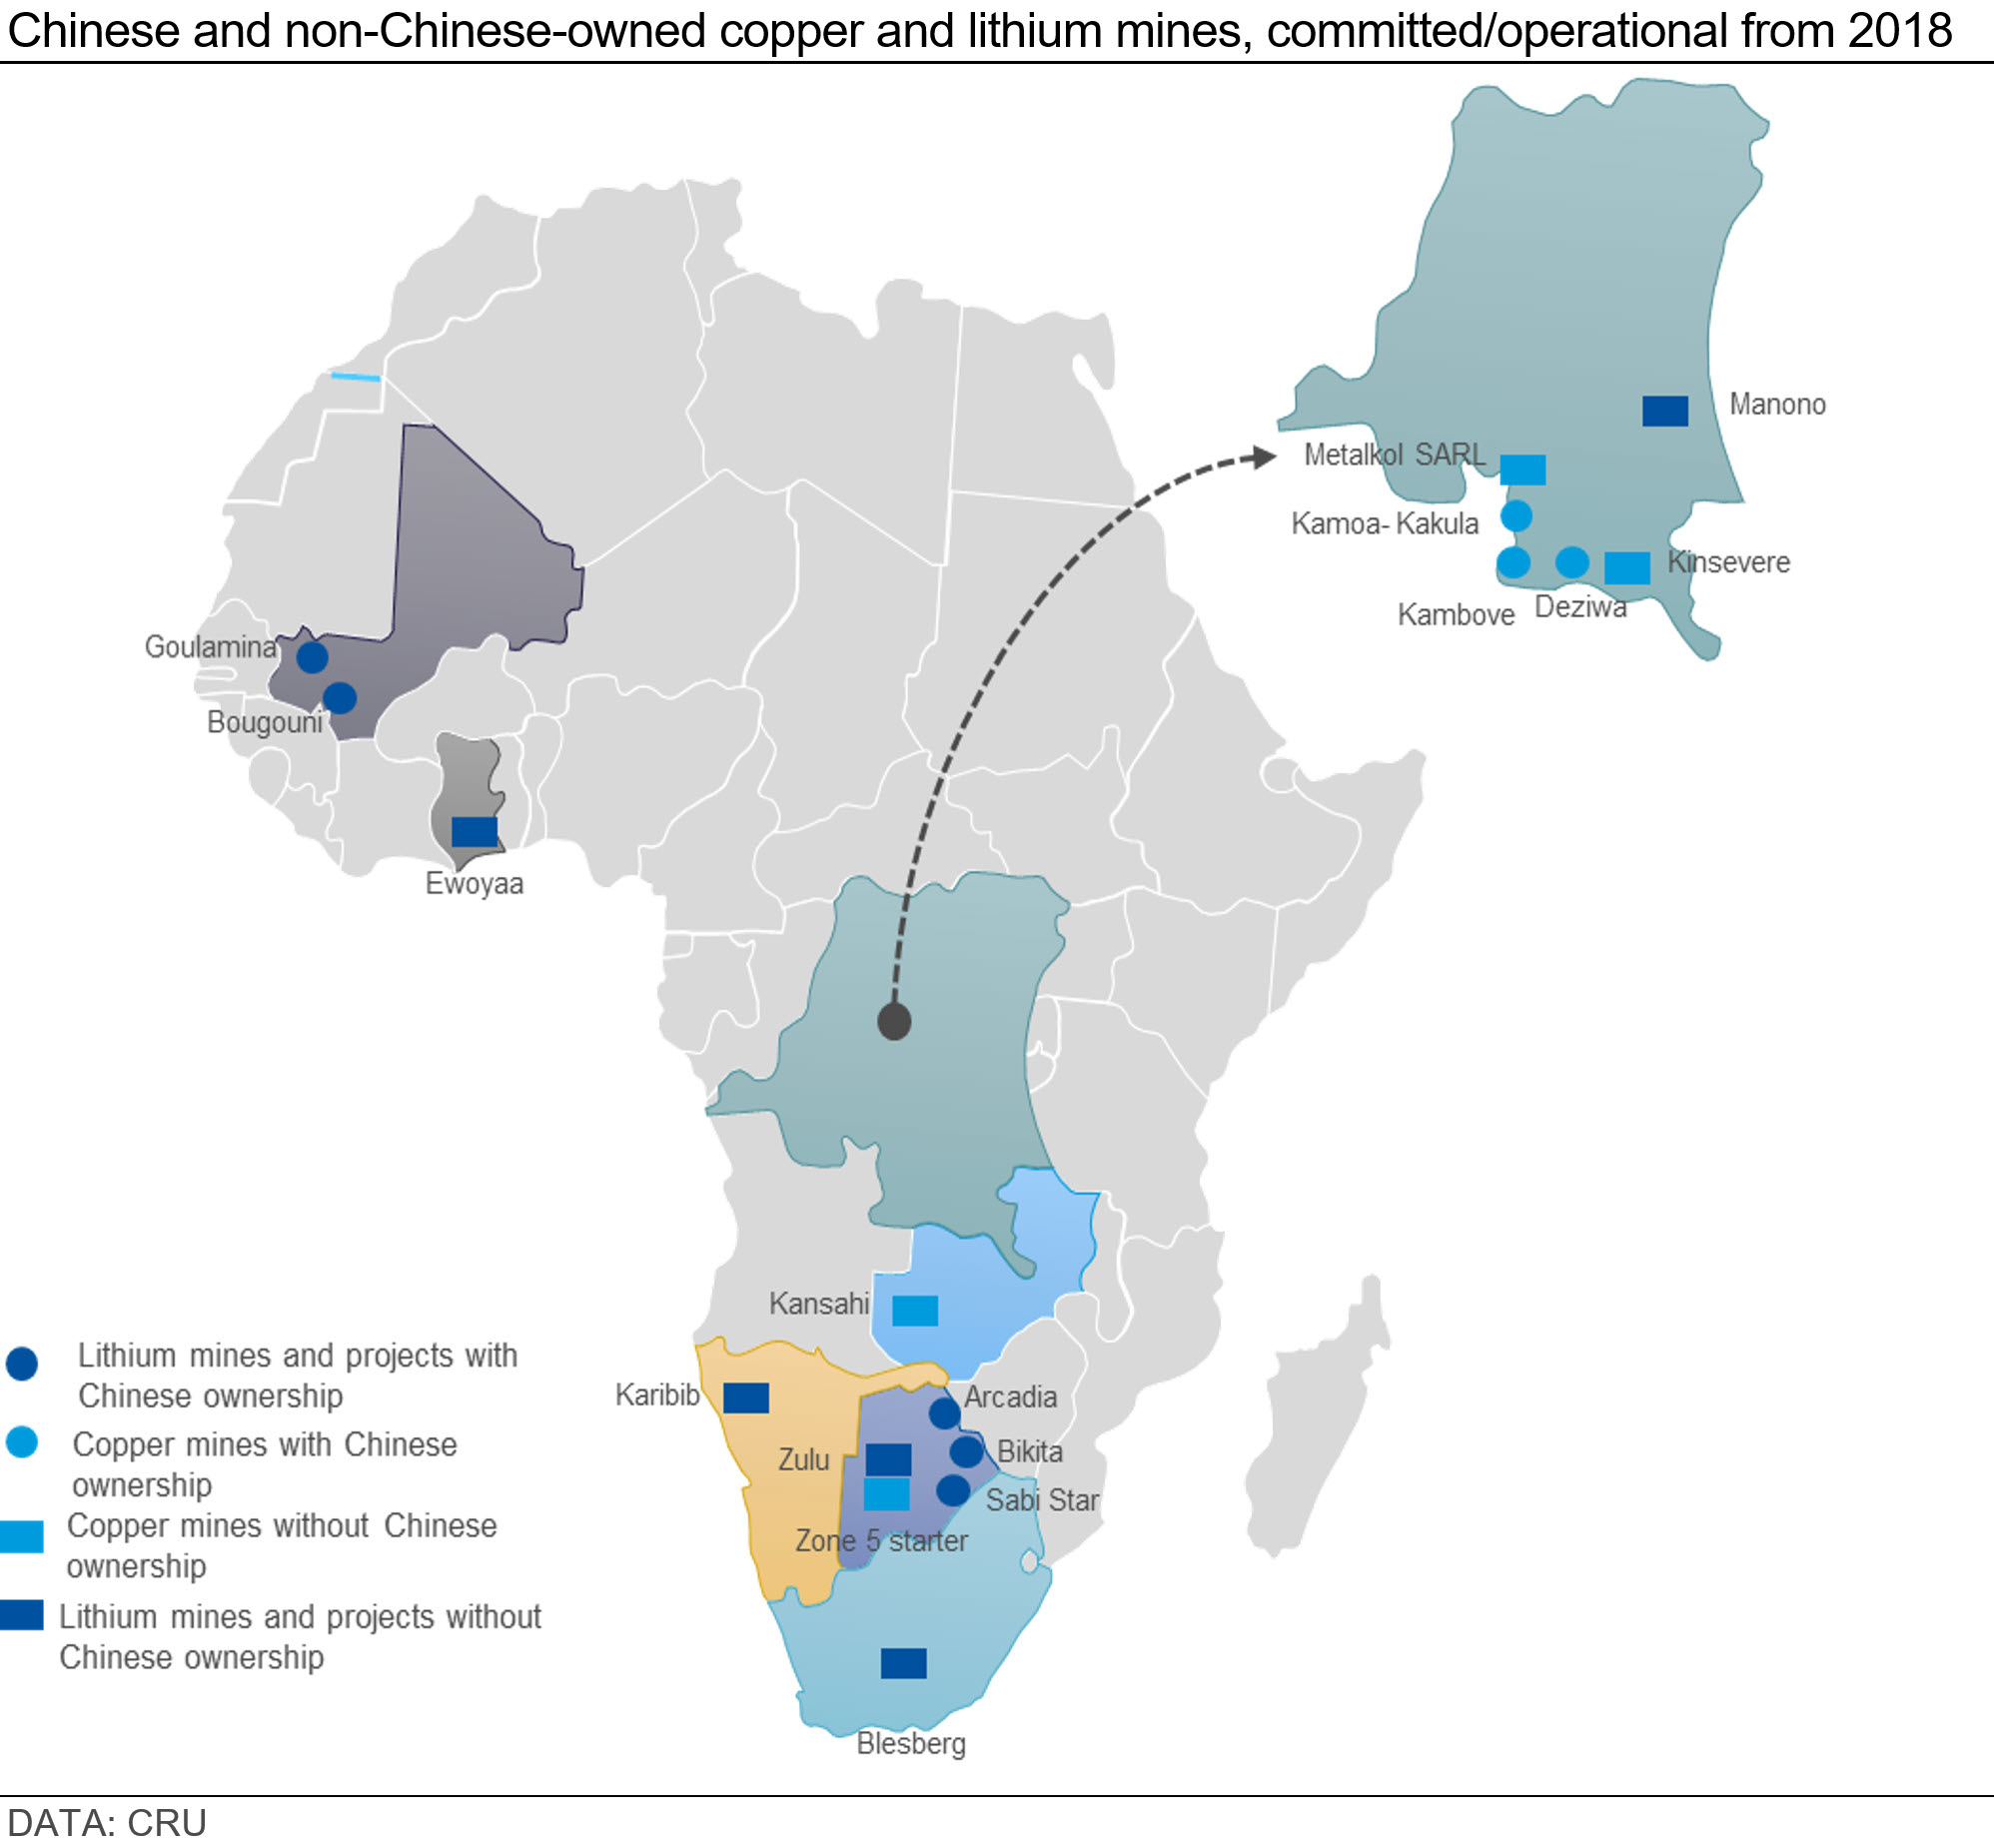 Map showing Chinese and non-Chinese-owned copper and lithium mines, committed/operational from 2018